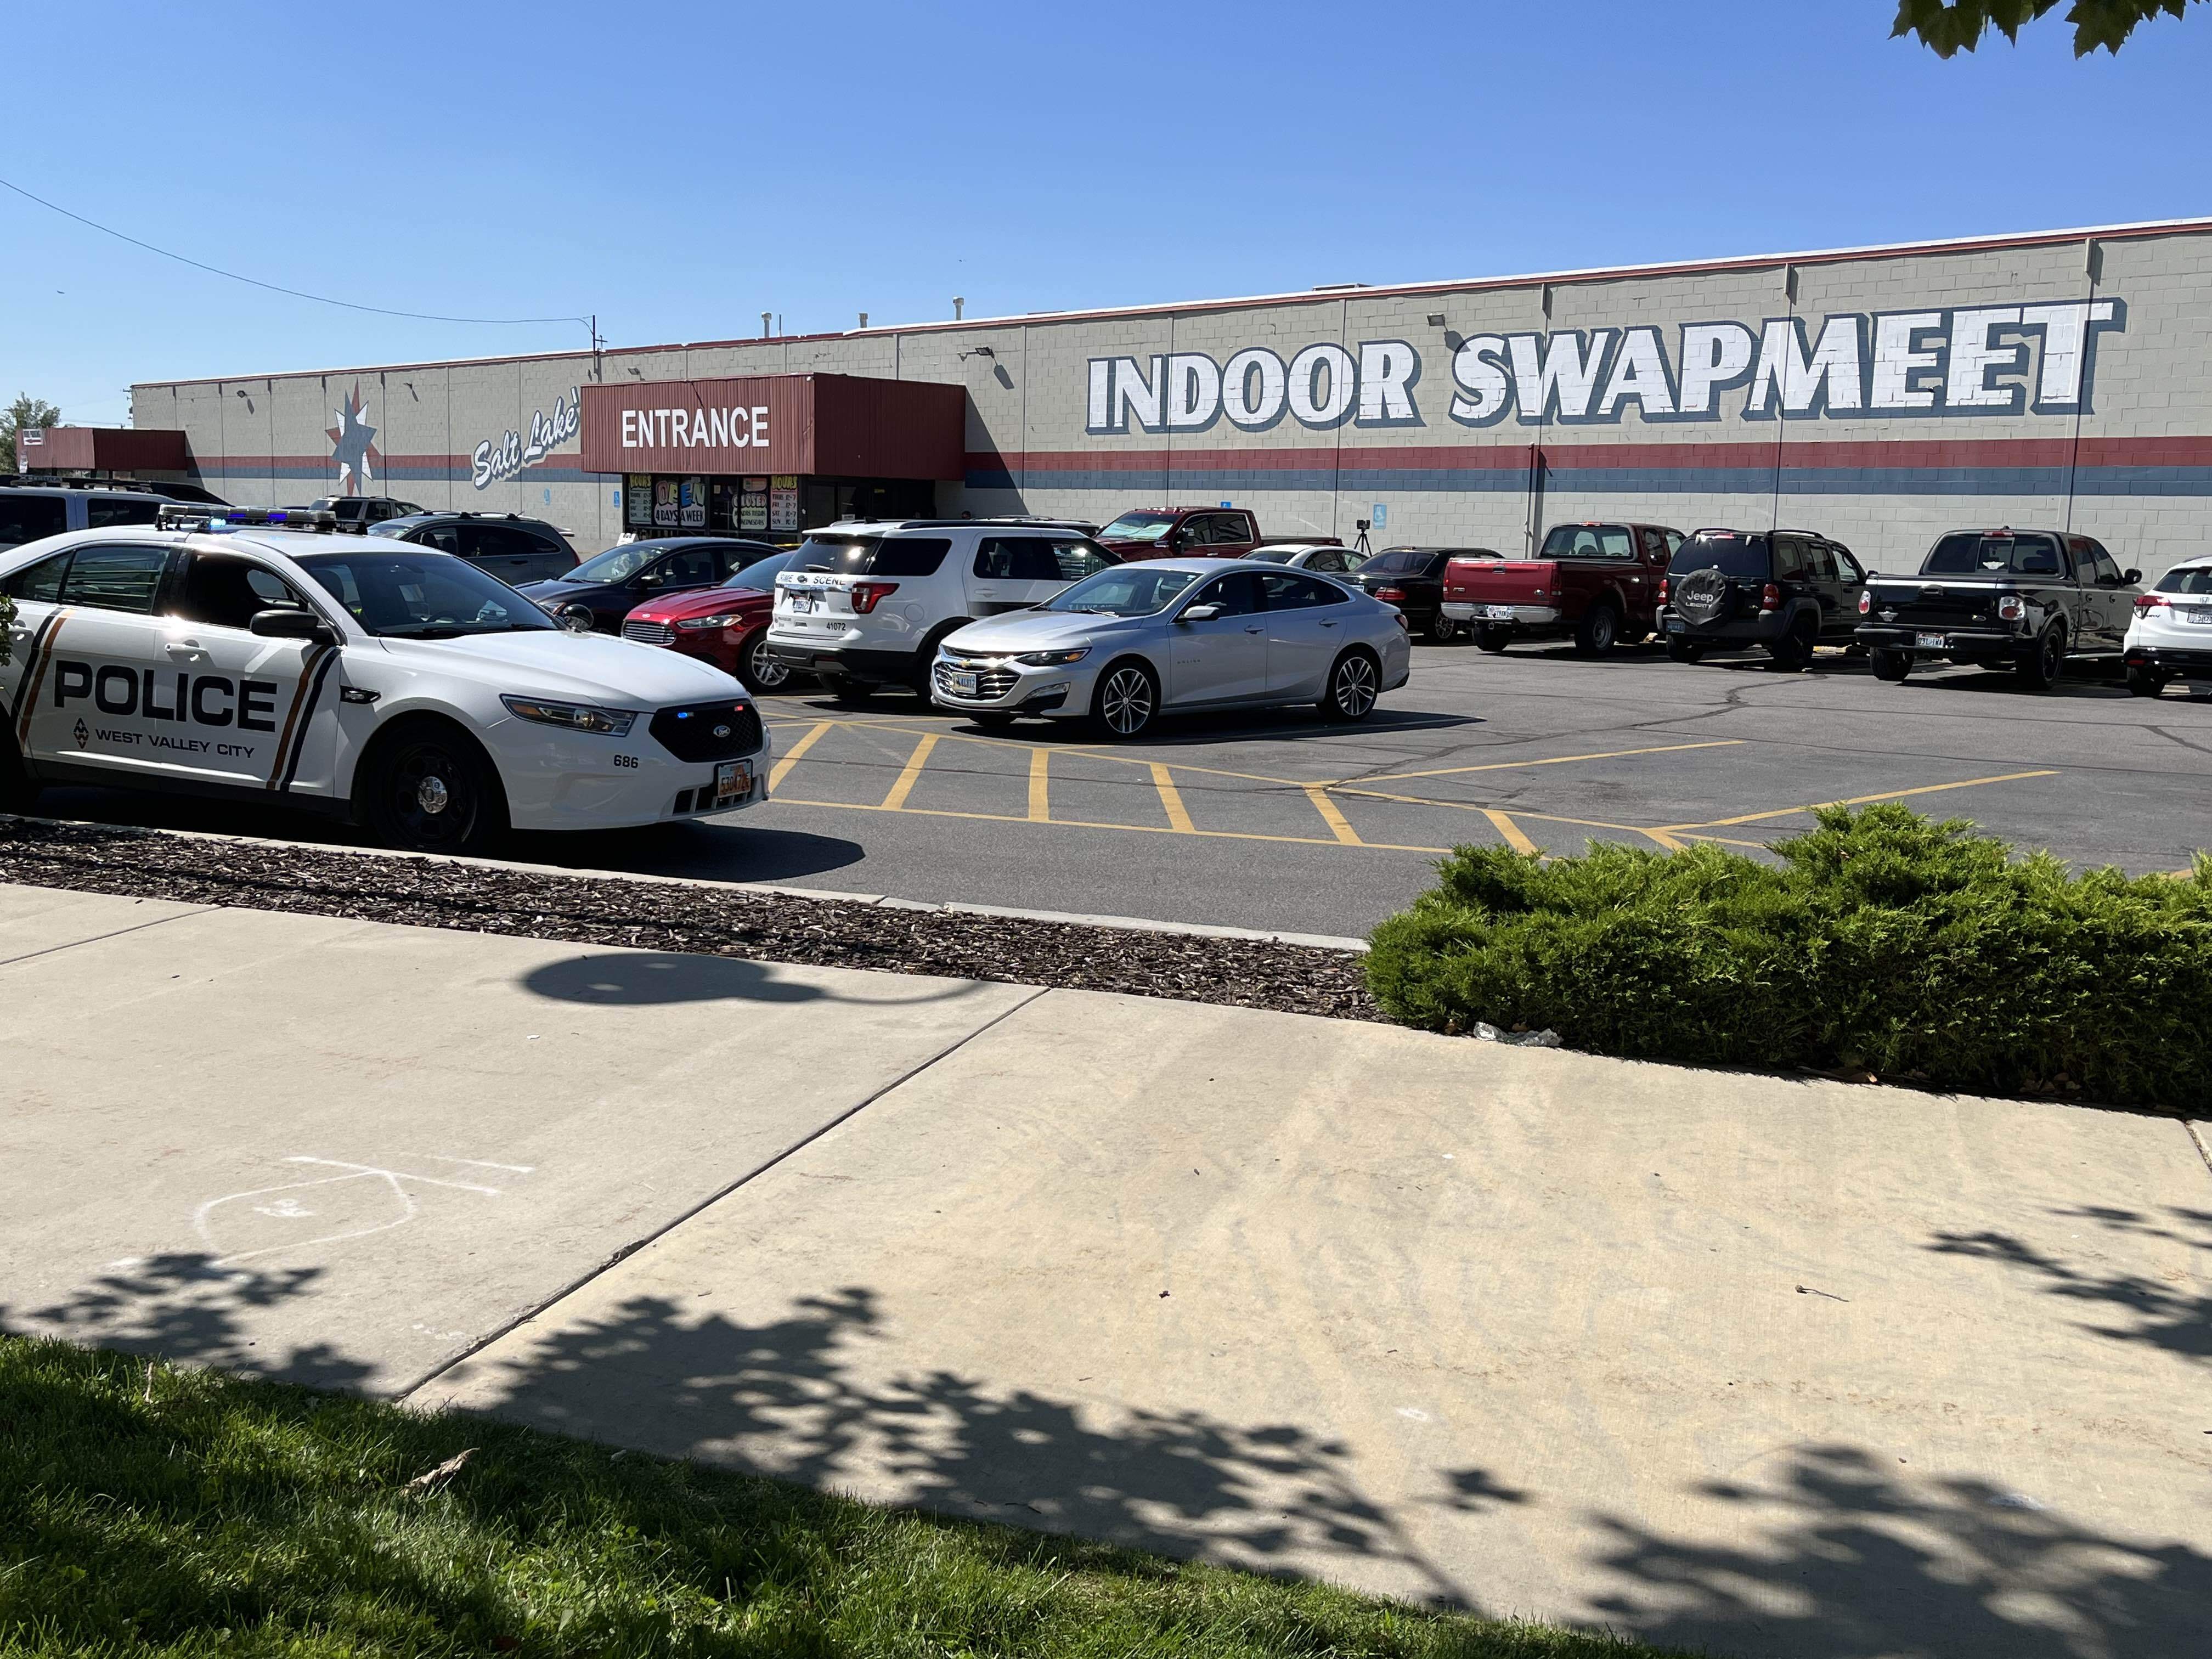 West Valley City mall shooting, other incidents spark anxiety